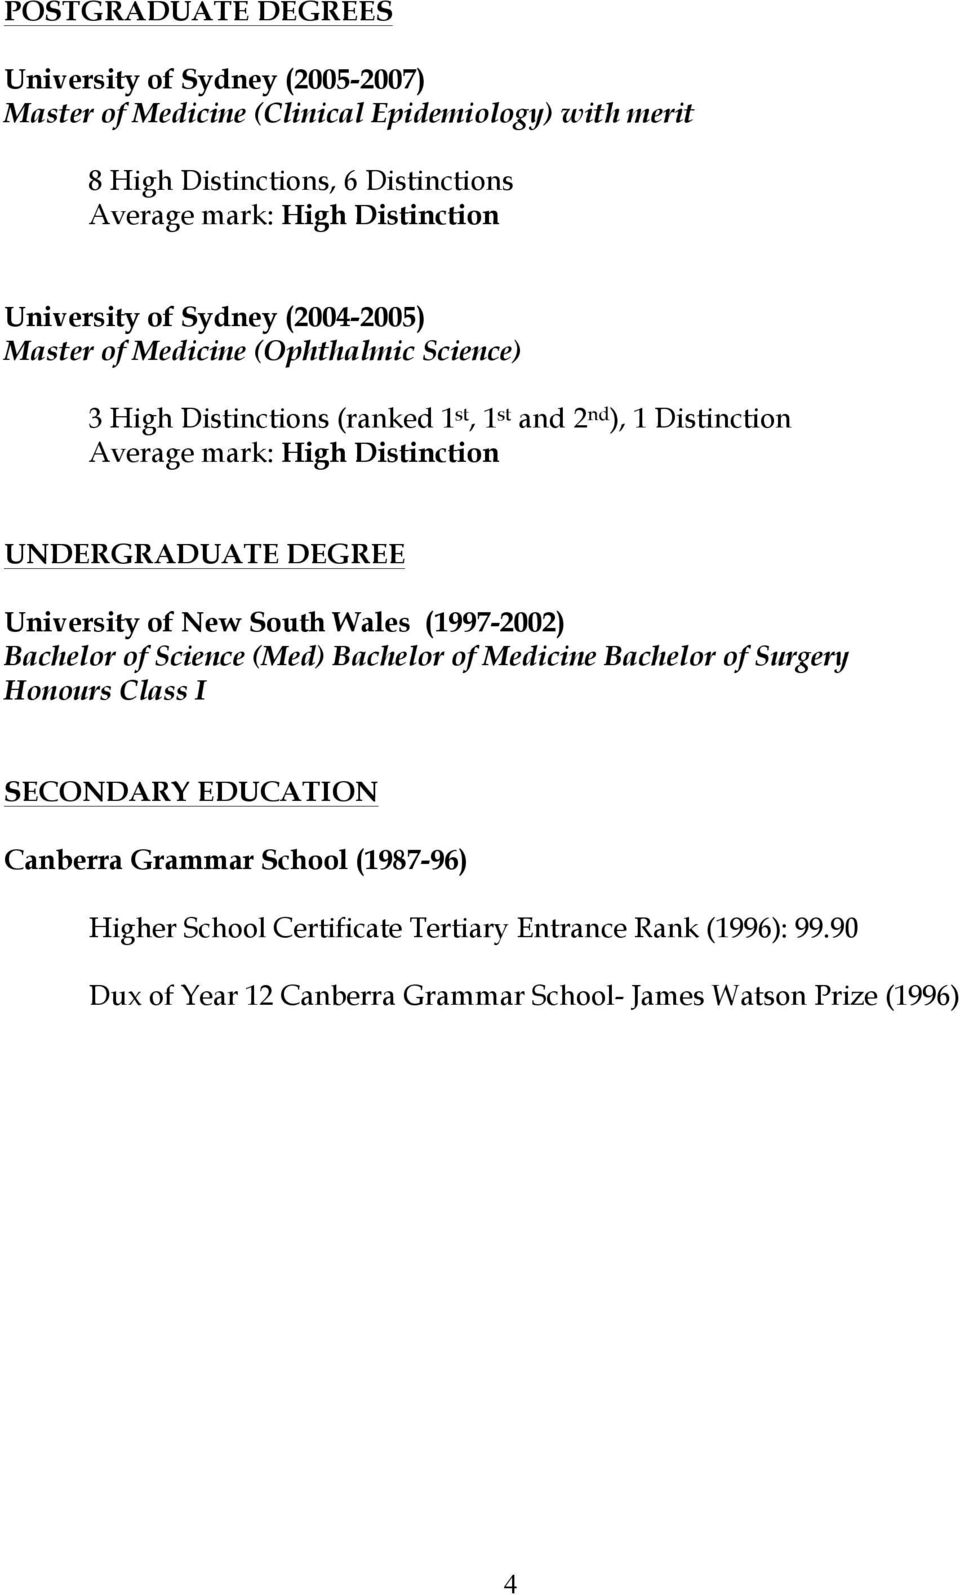 Distinction UNDERGRADUATE DEGREE University of New South Wales (1997-2002) Bachelor of Science (Med) Bachelor of Medicine Bachelor of Surgery Honours Class I SECONDARY